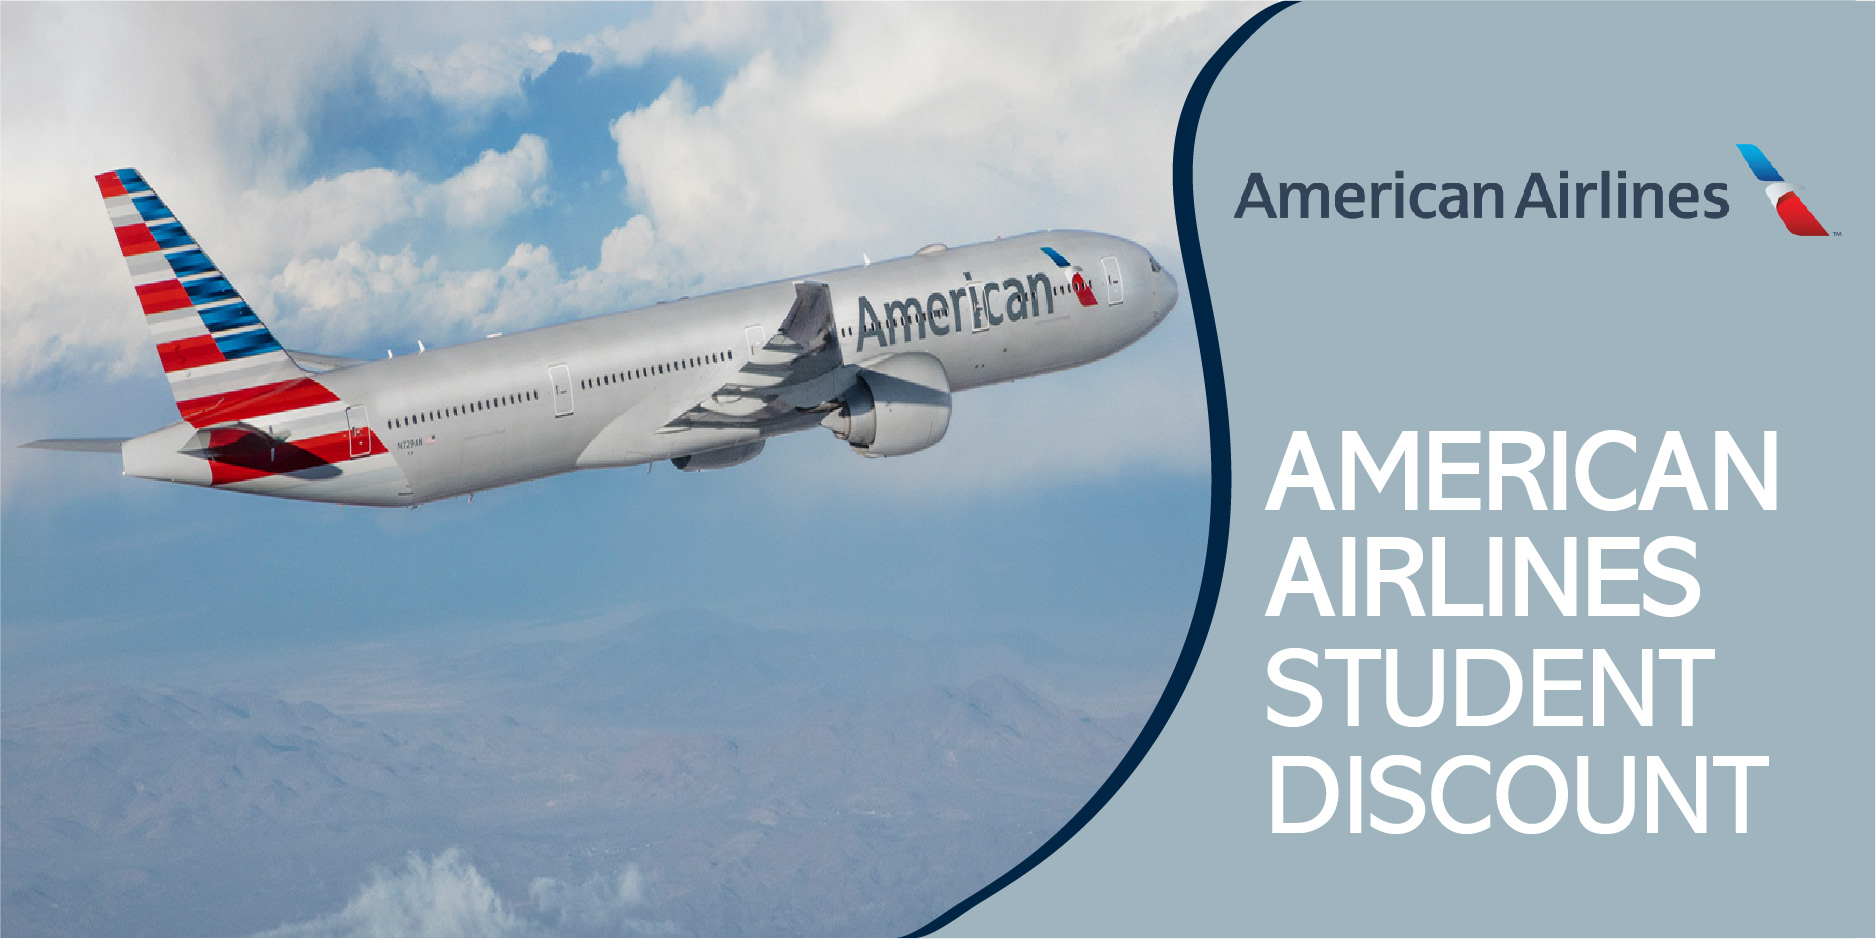 American Airlines_Student Discount